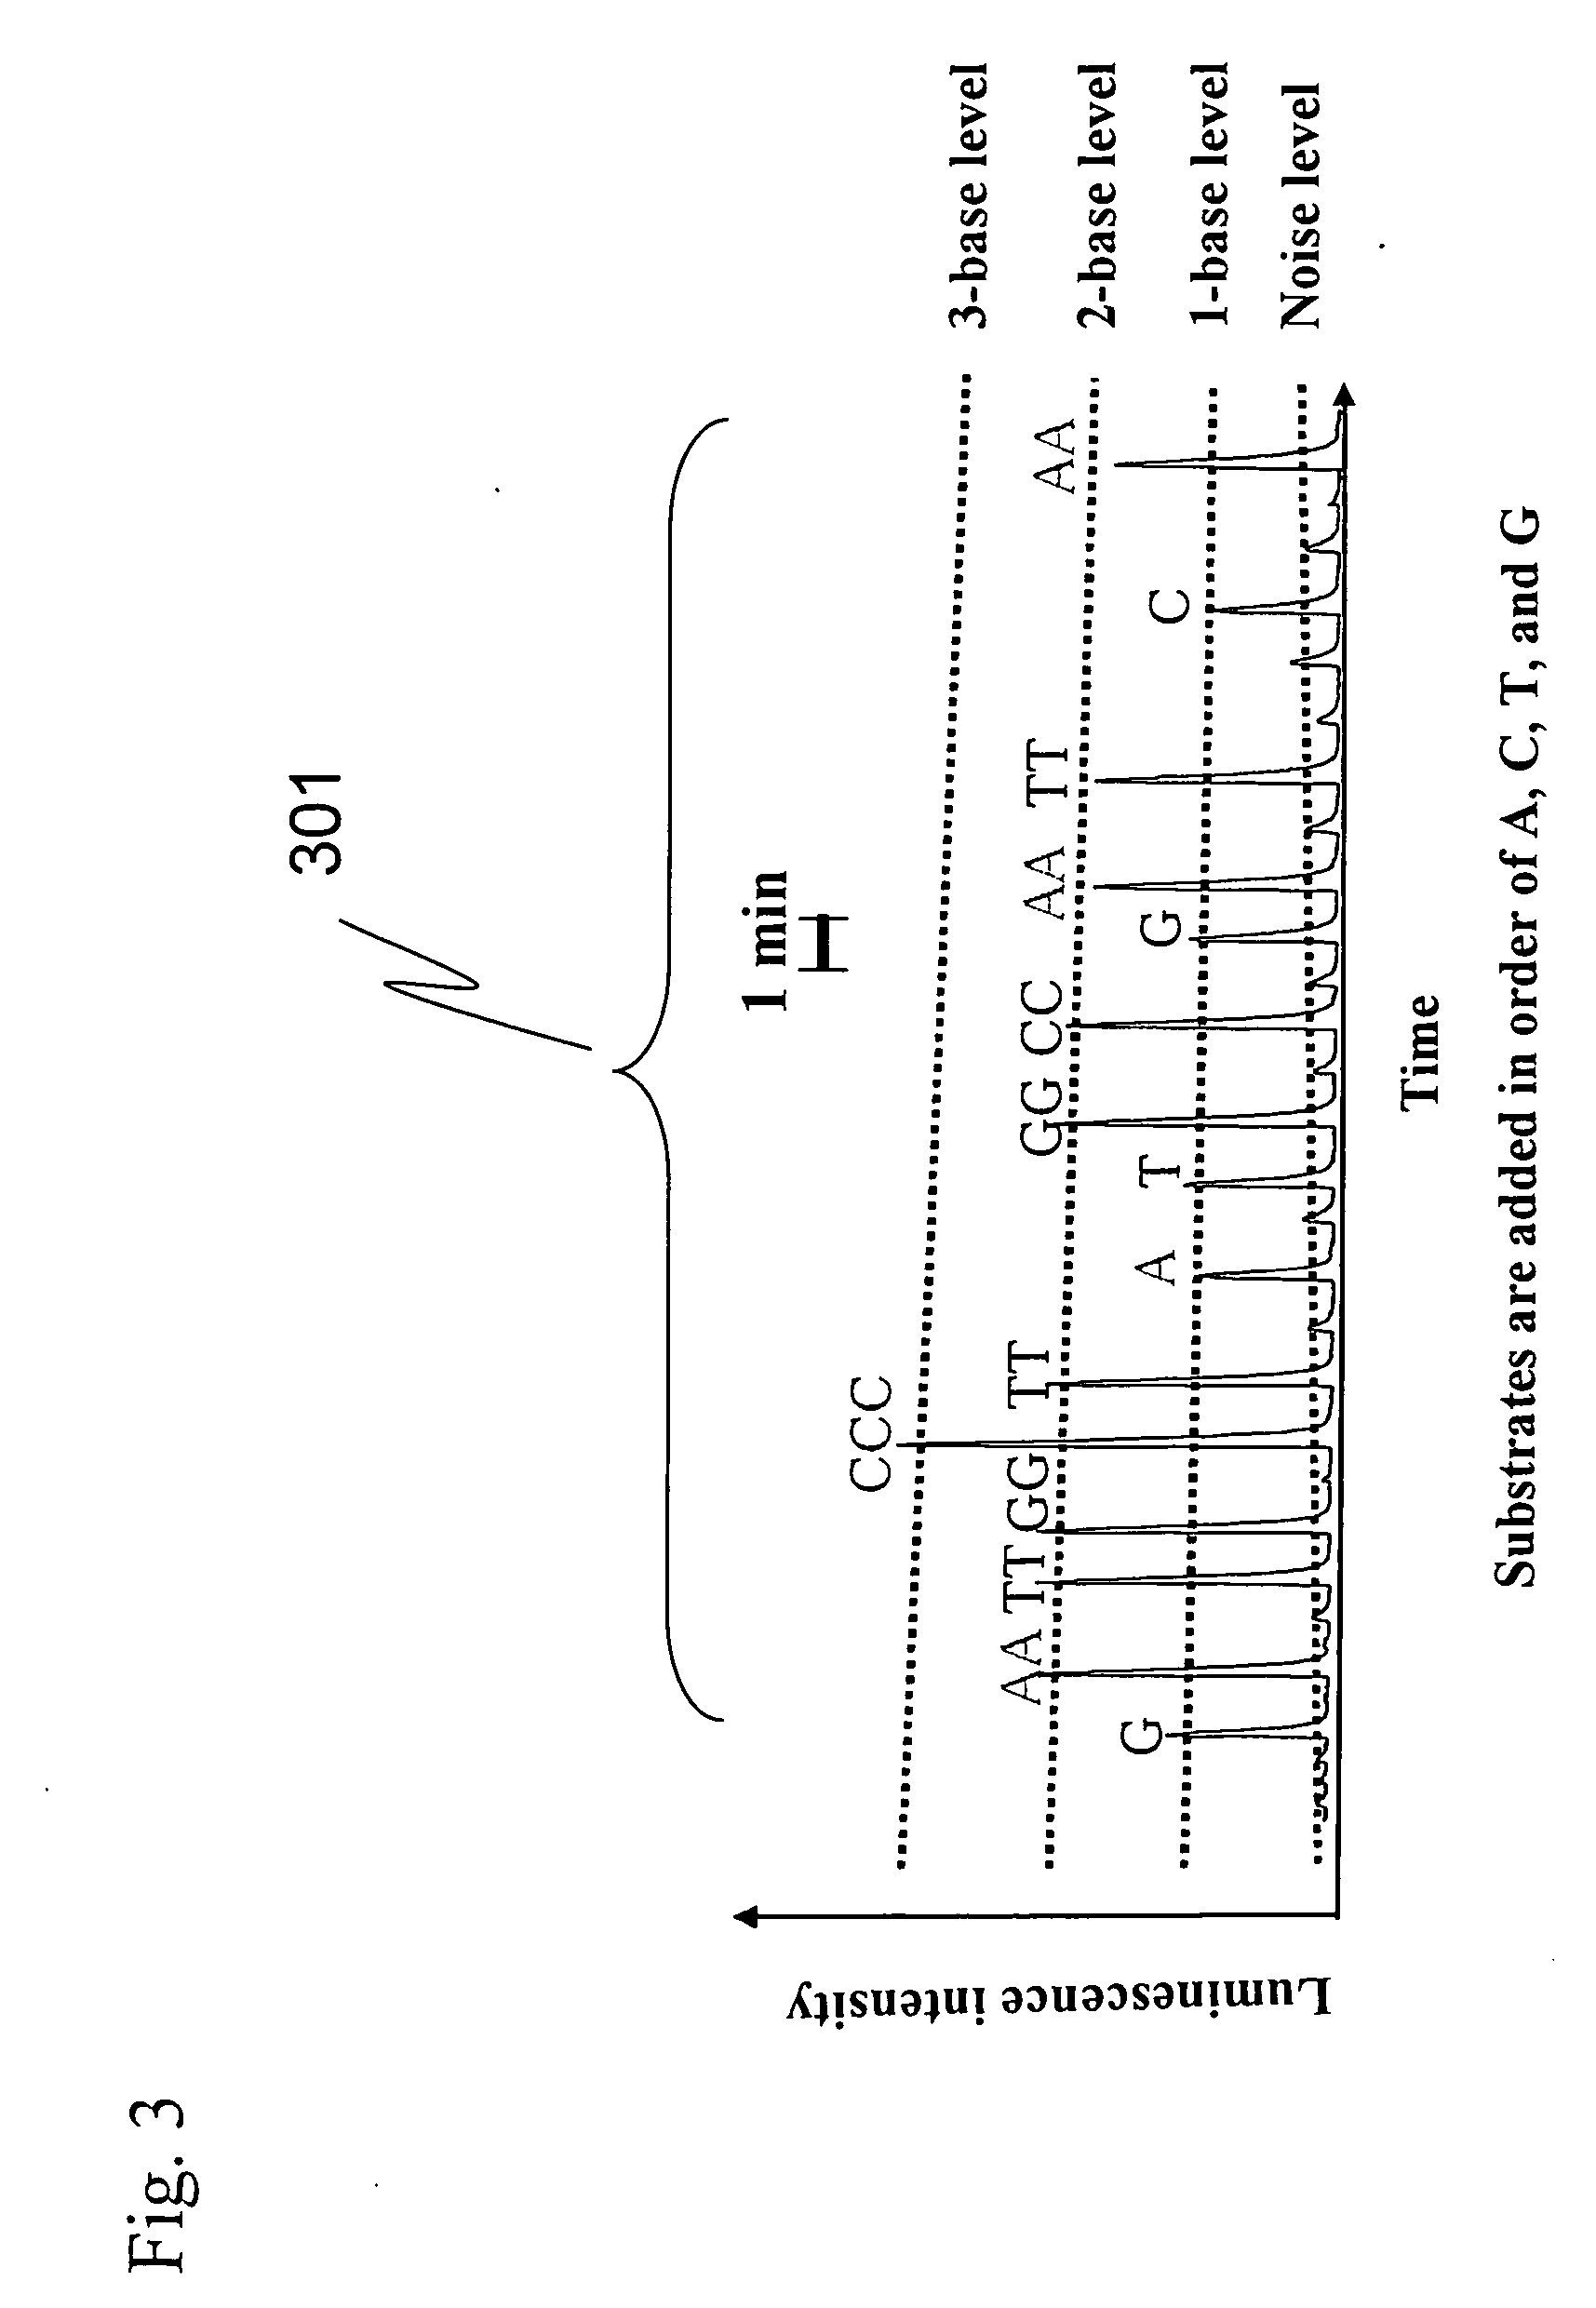 Method and reagent for sequencing